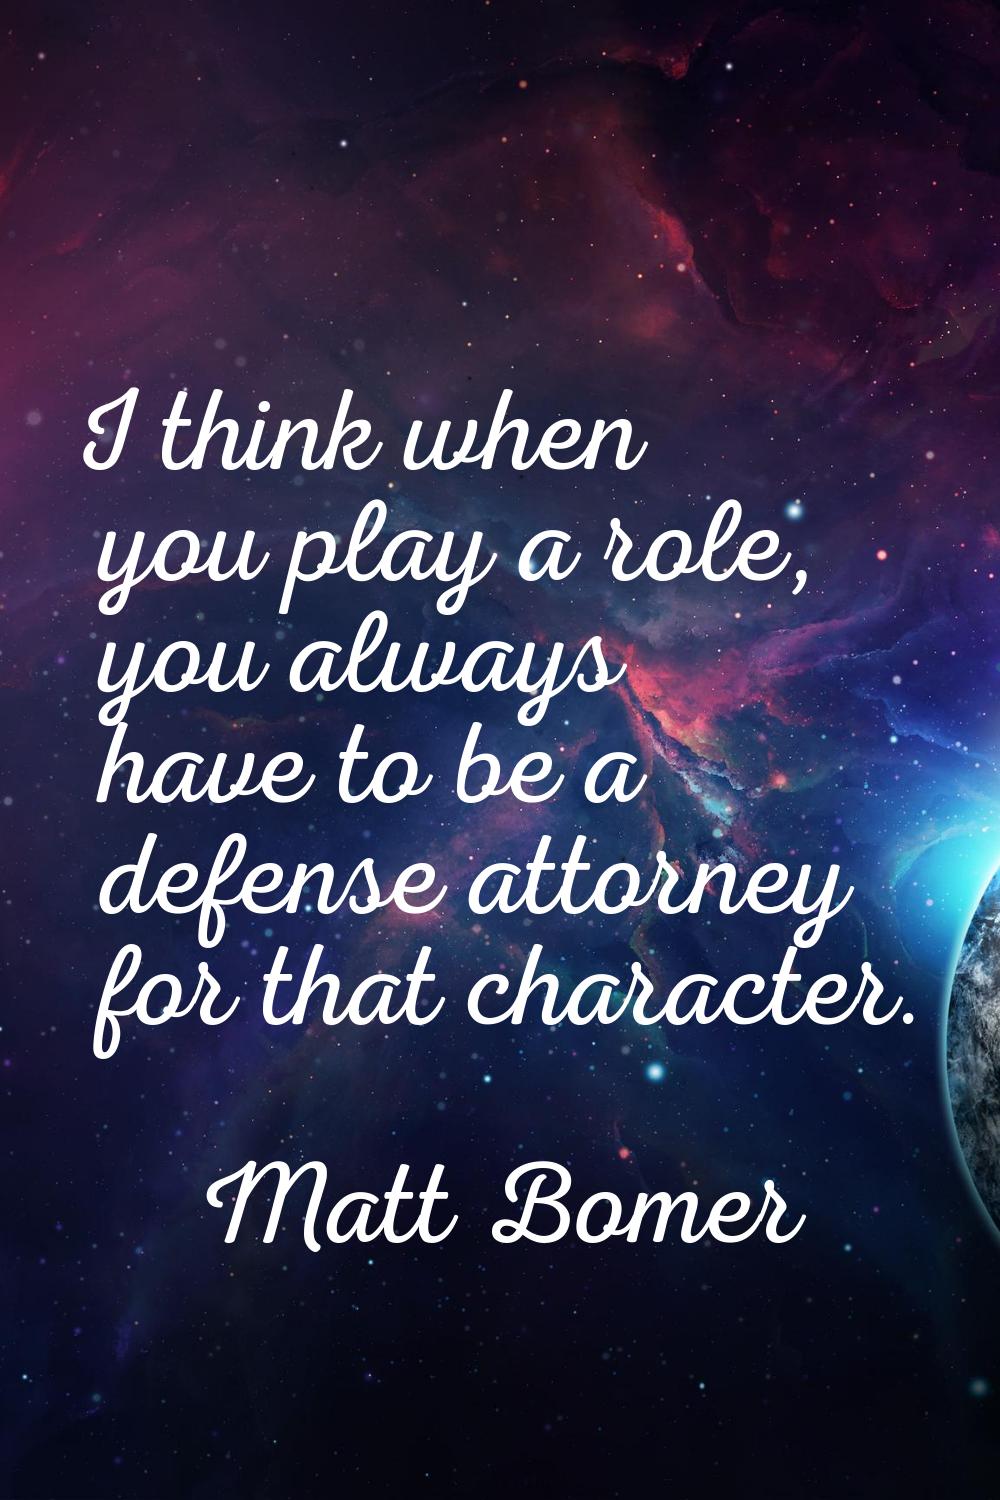 I think when you play a role, you always have to be a defense attorney for that character.